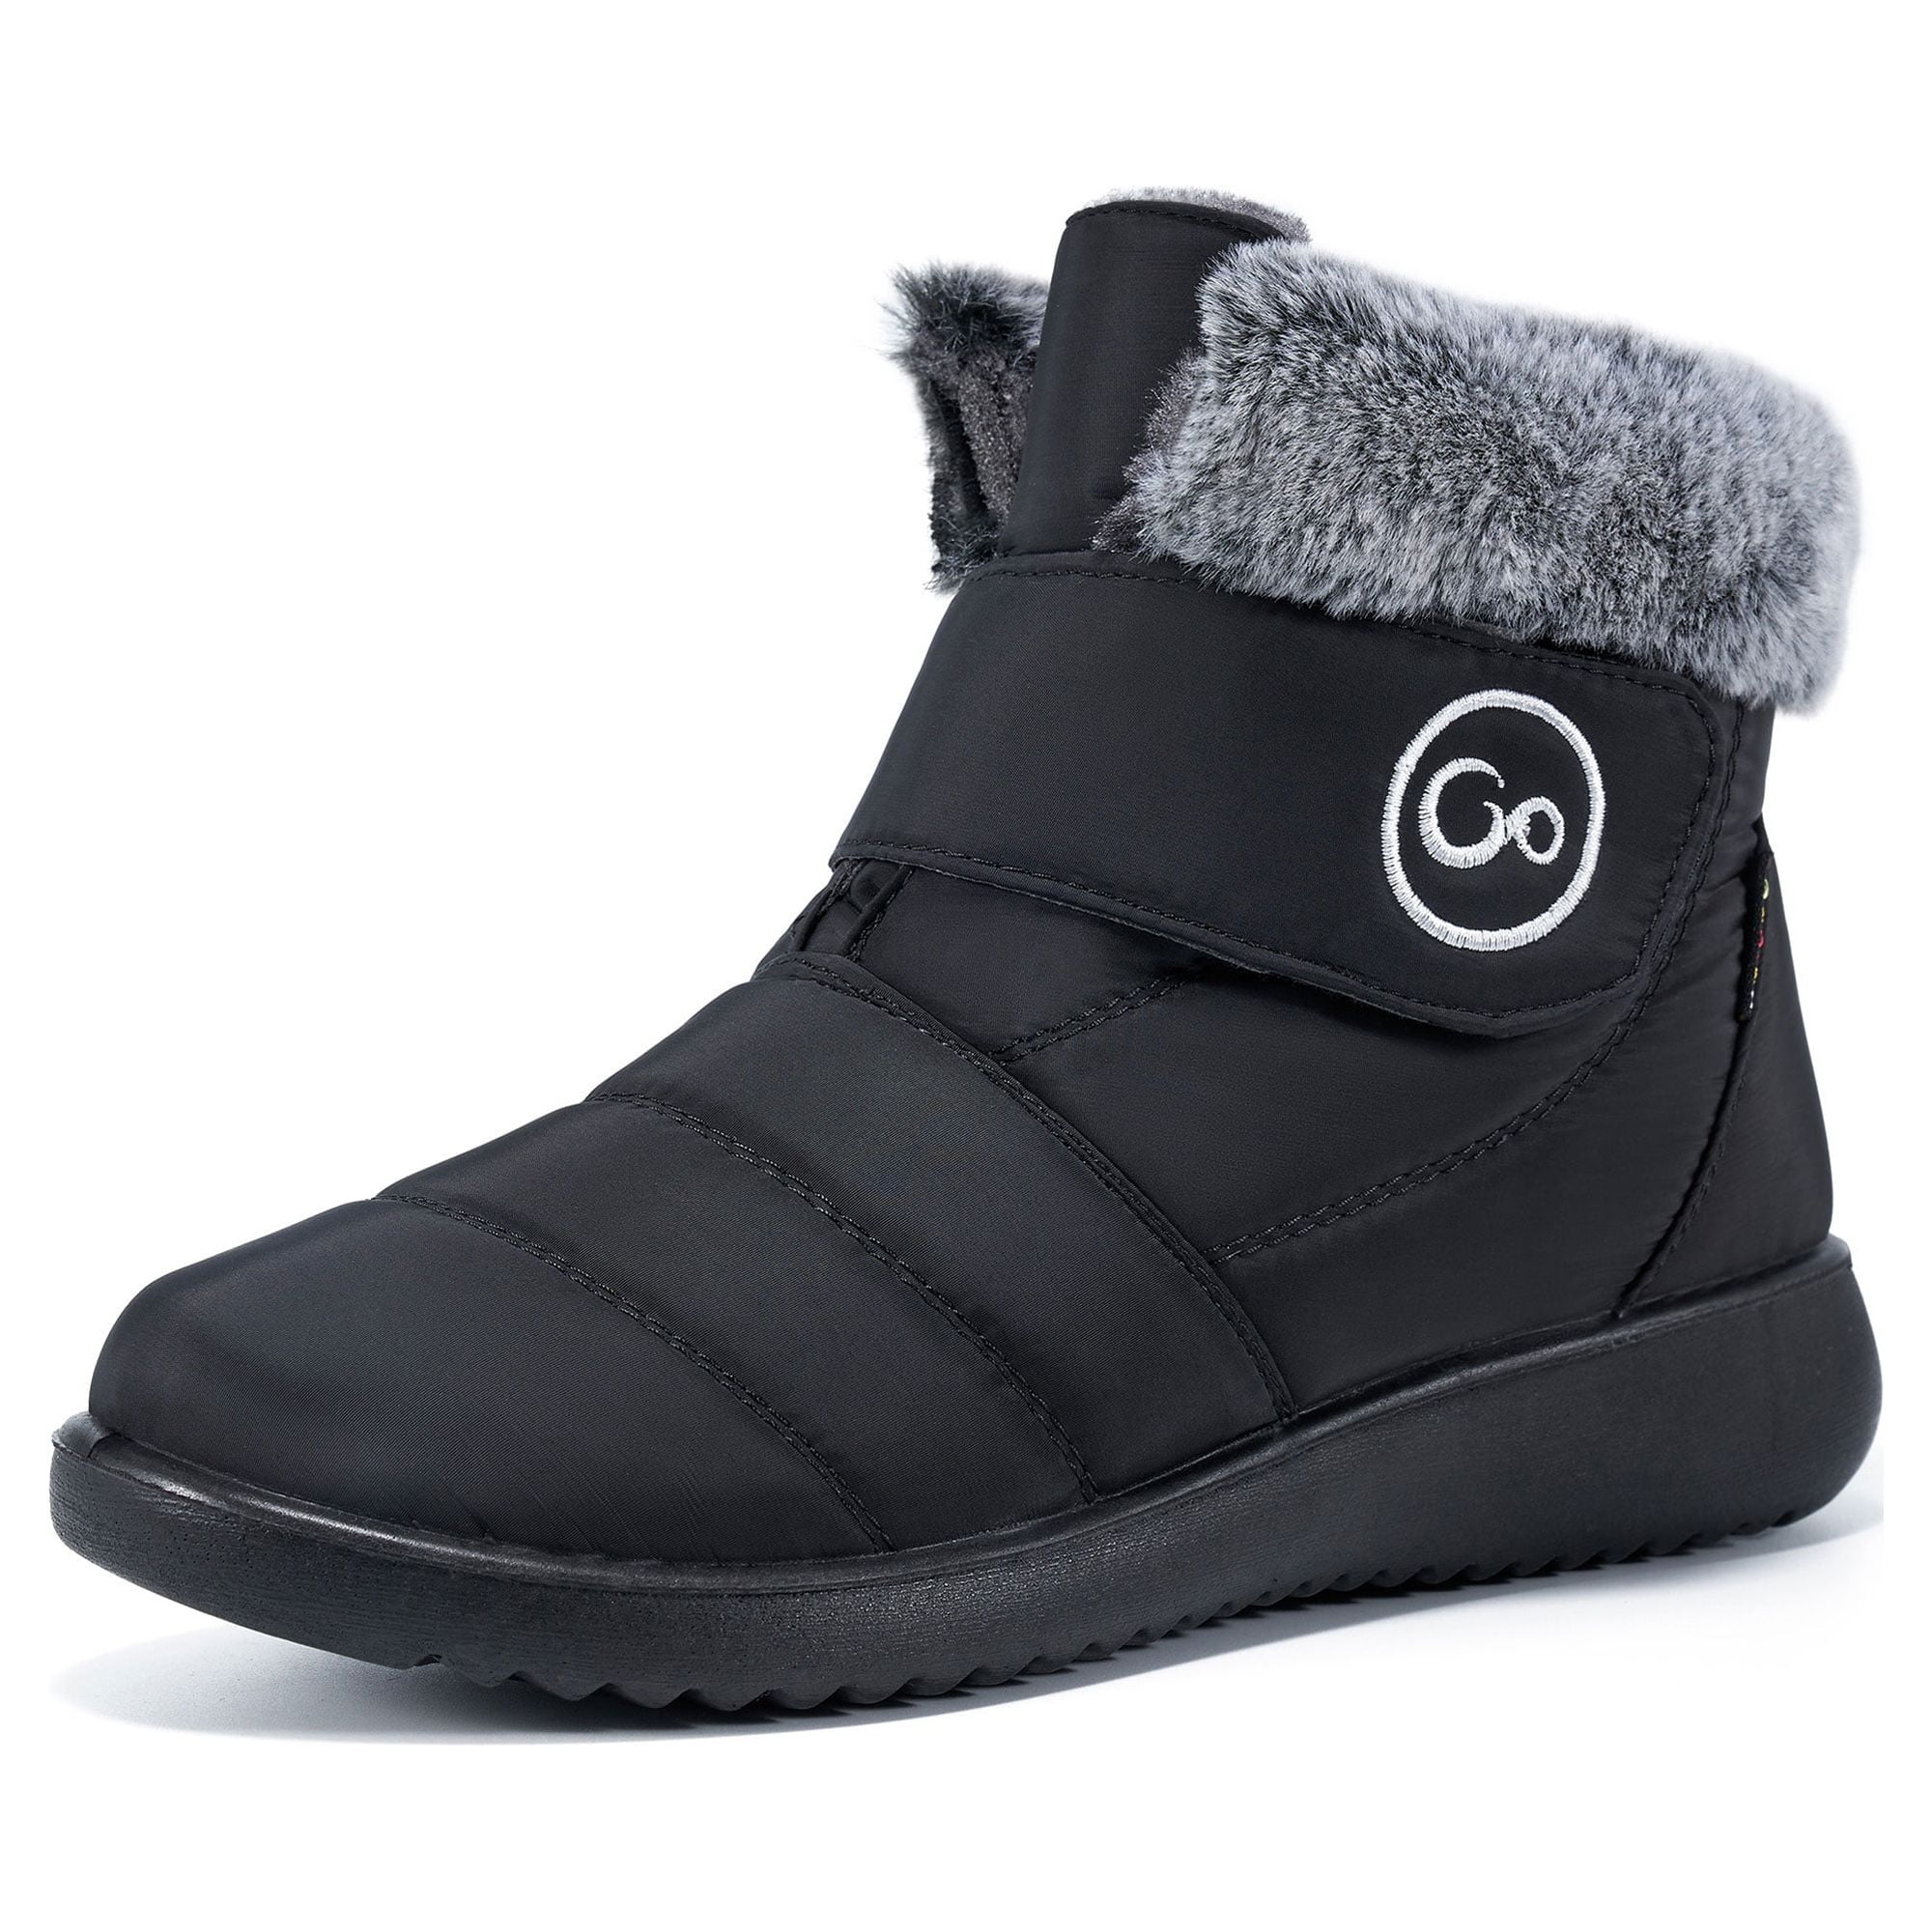 Womens Winter Snow Boots Faux Fur Lined Warm Waterproof Ankle Boots ...